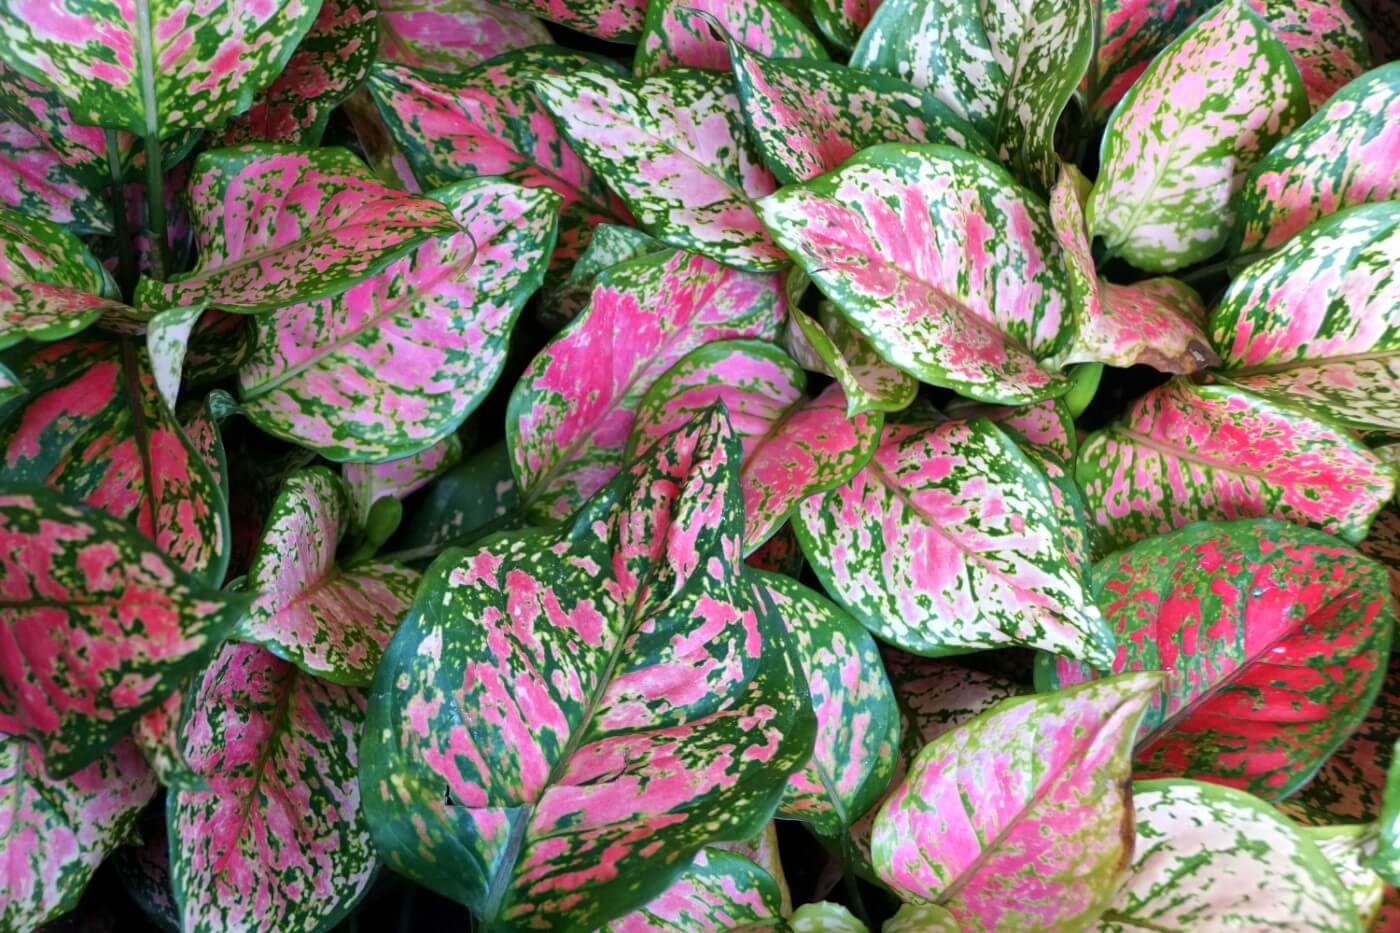 Aglaonema Plants: How to Grow and Care for them